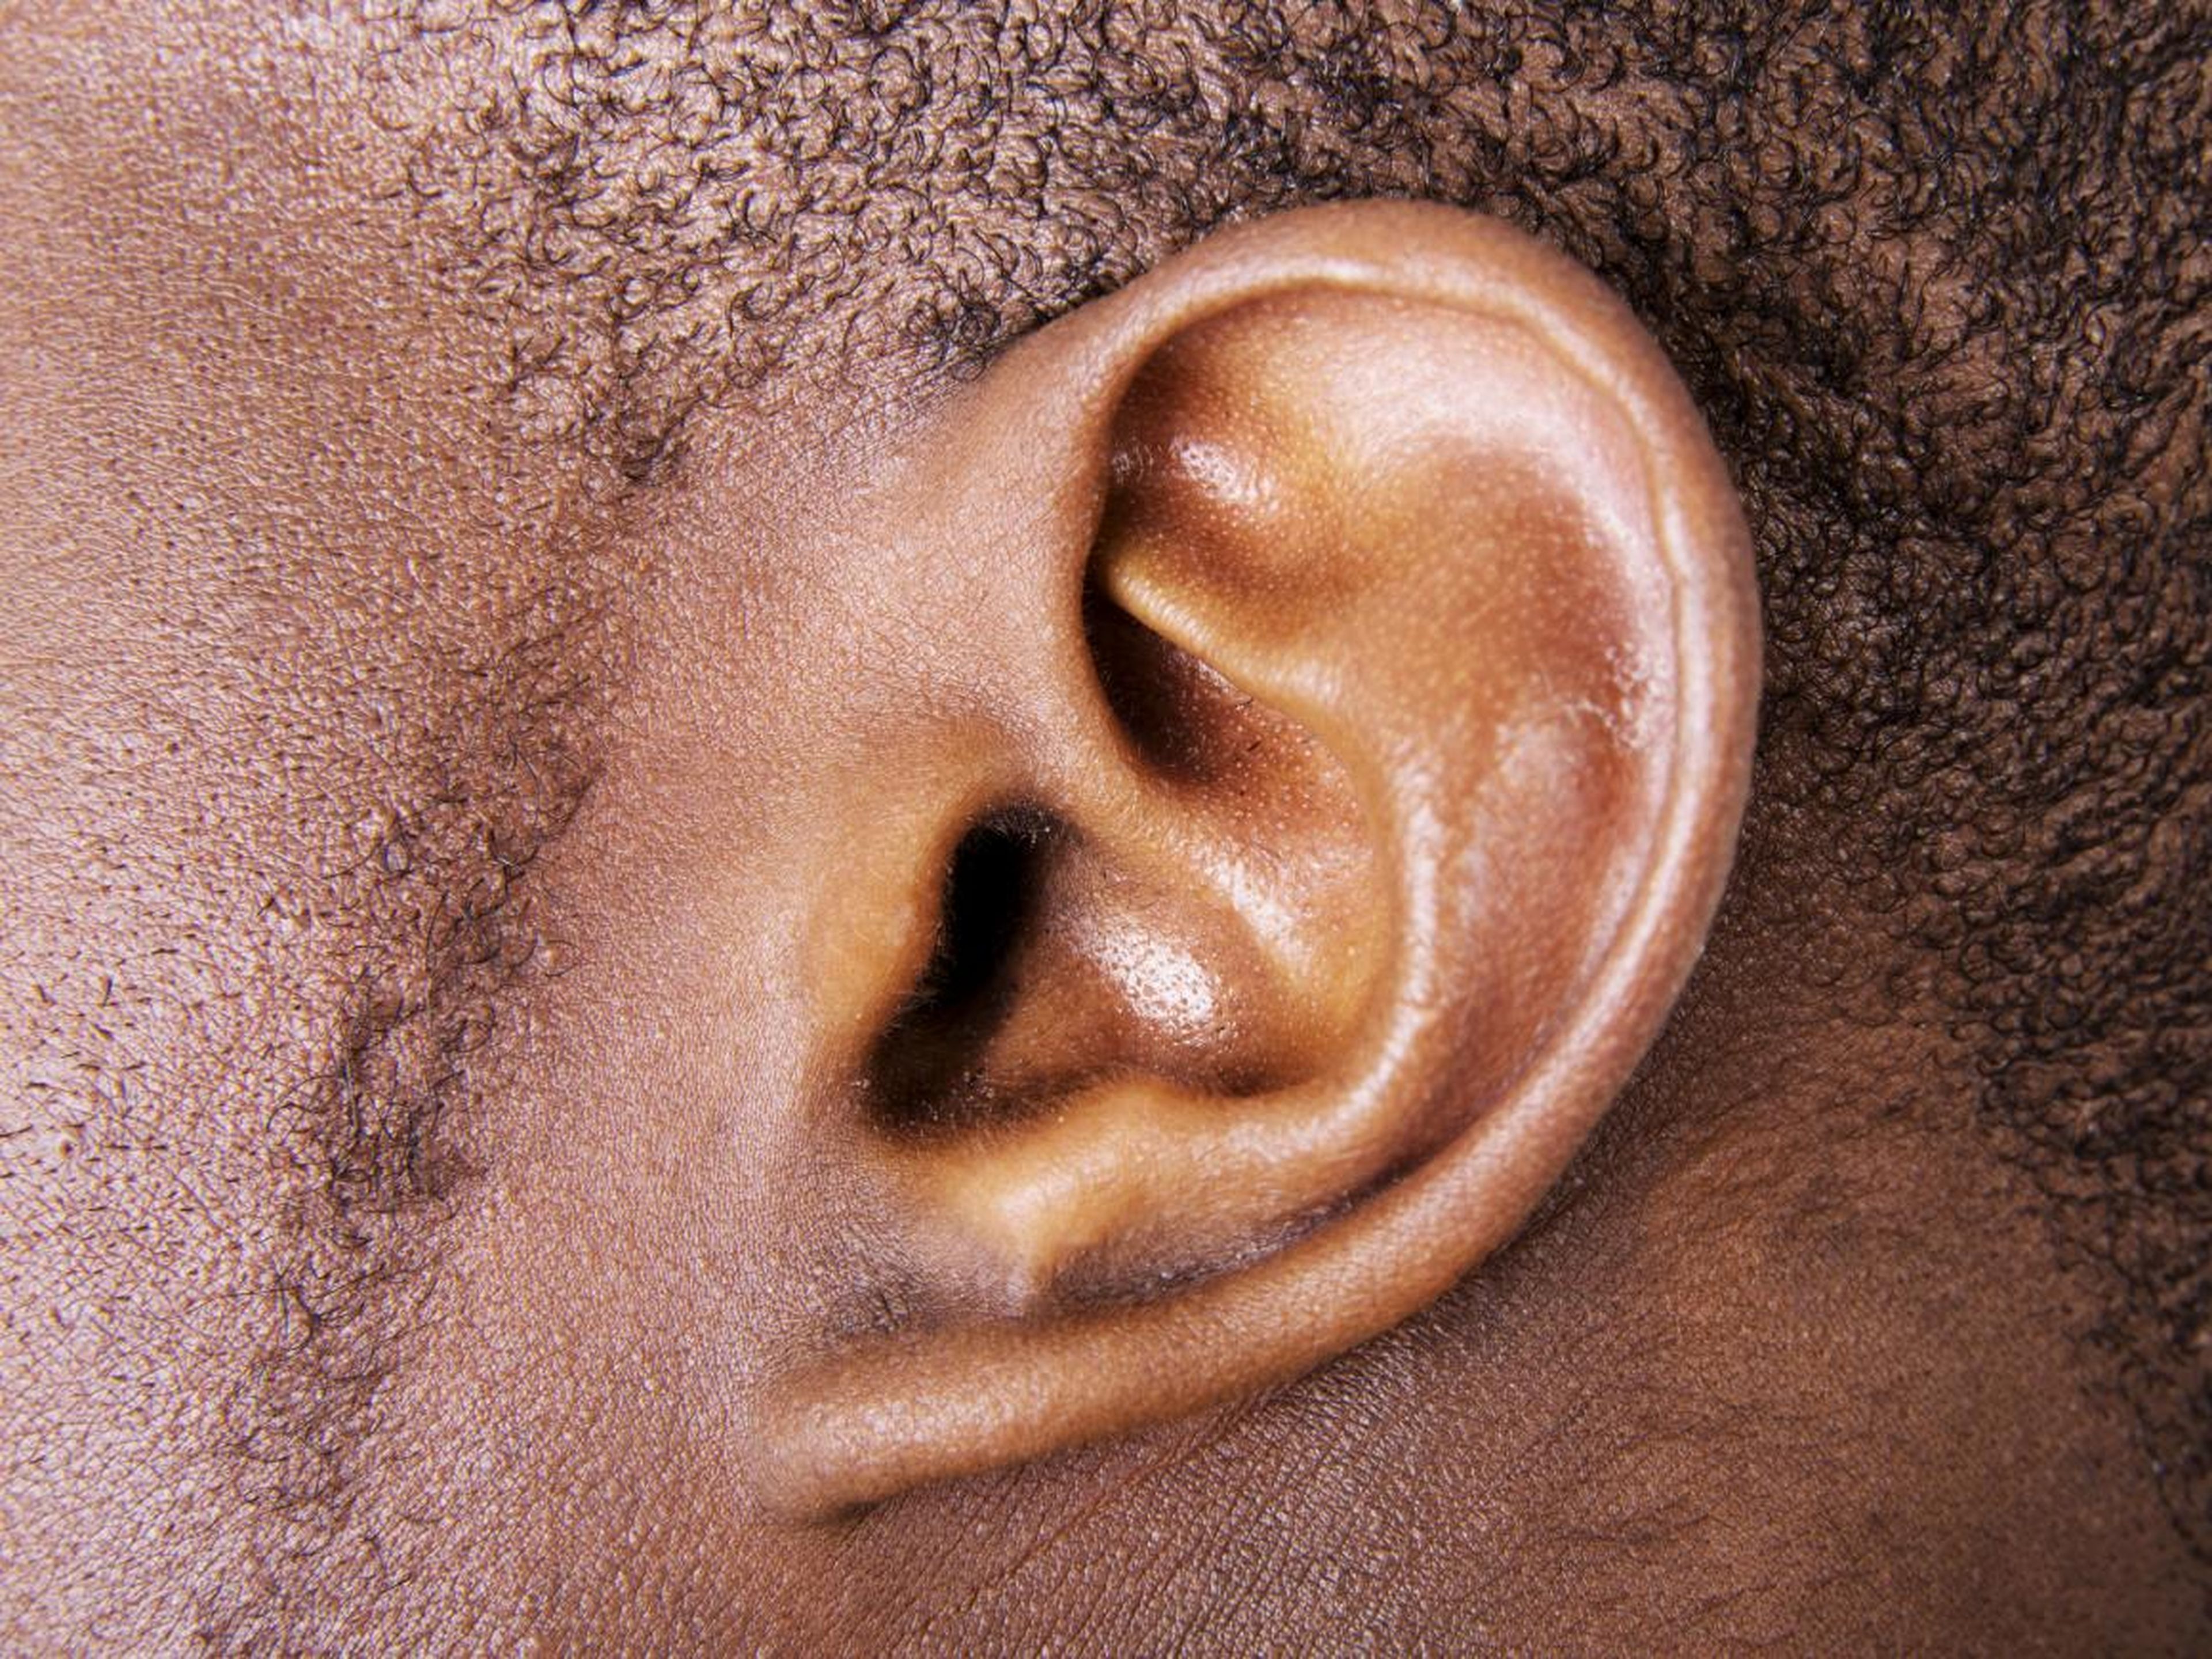 Auricular muscles control the visible part of the ear, but humans have lost the ability to use them. Other mammals use these muscles to detect prey and predators.